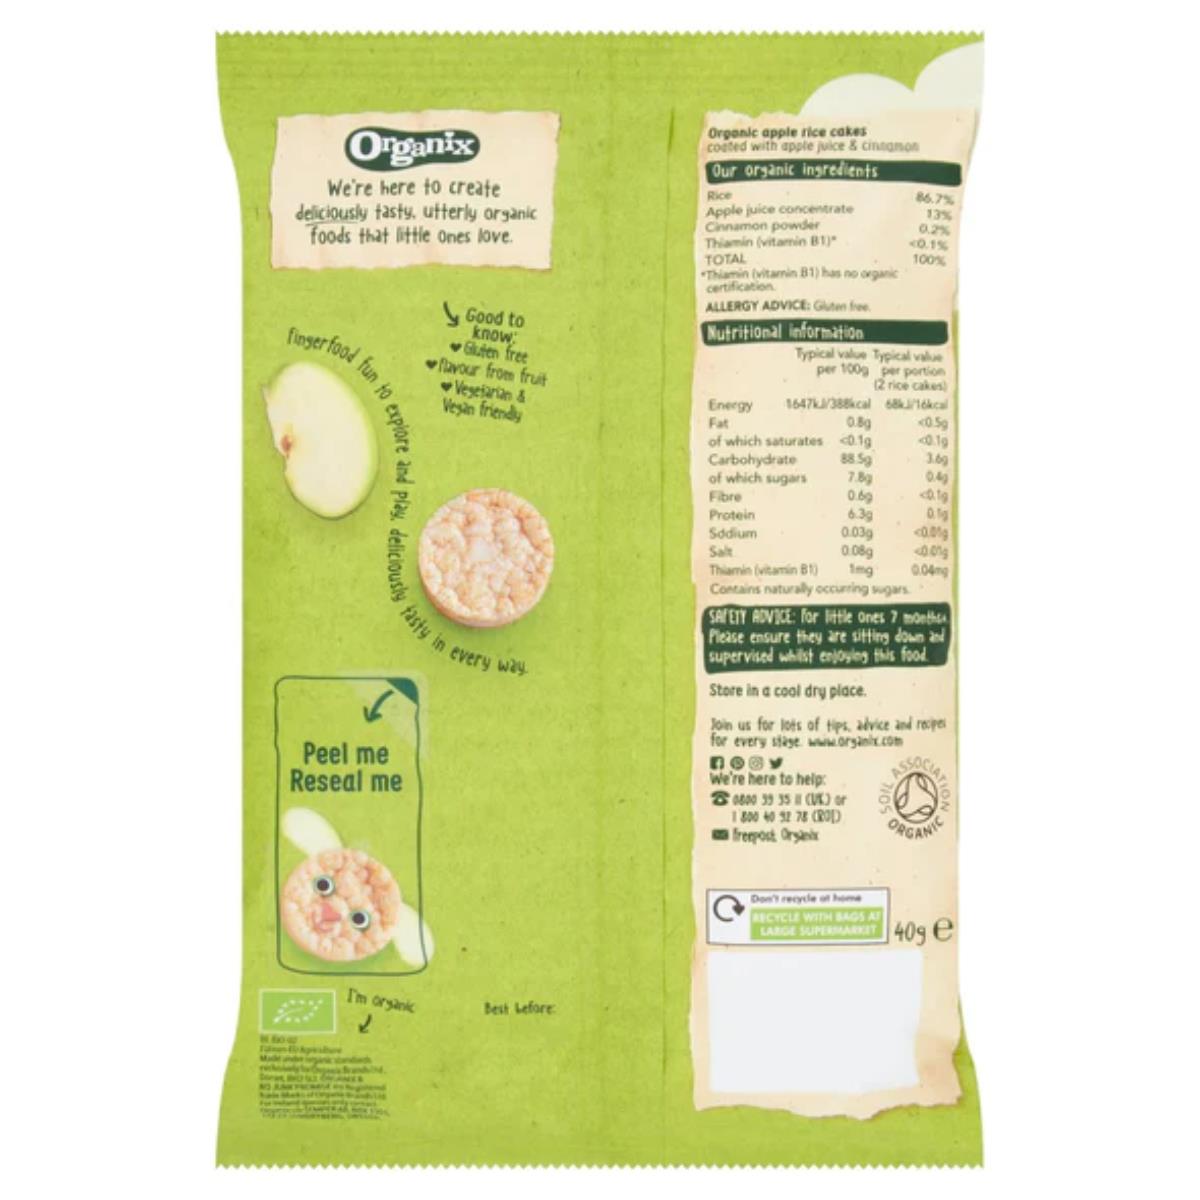 Organix Finger Foods 40g - Apple Rice Cakes Clouds